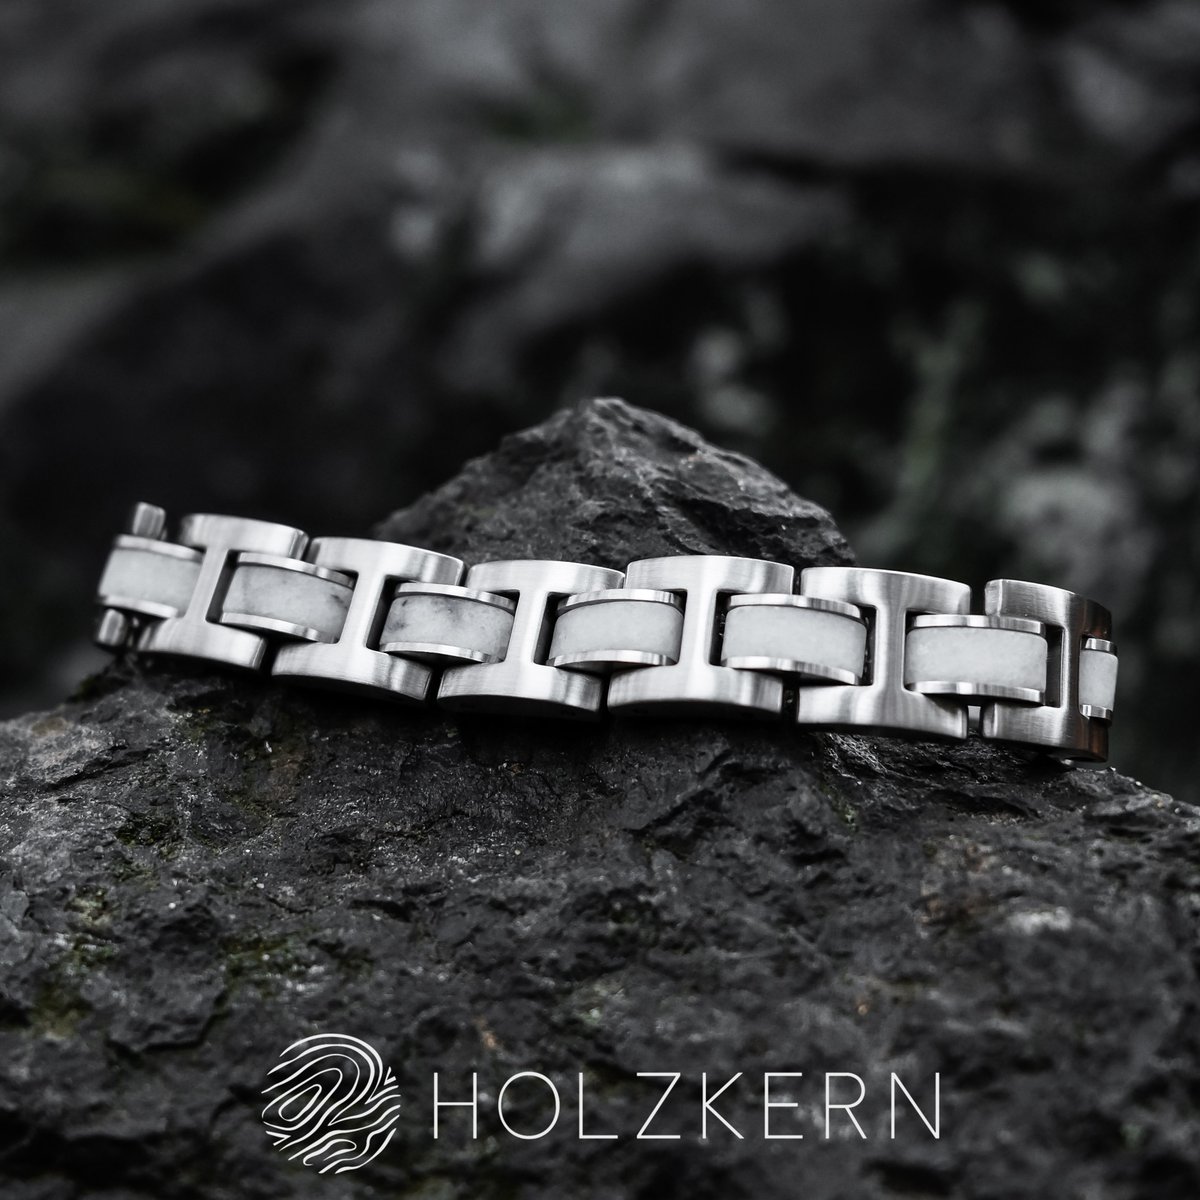 Discover the BANDLETS from Holzkern today! world.holzkern.com/en_world/shop/… With these Bandlets, we have created a product category that combines materials of wood, stone and stainless steel with link constructions inspired by the watchmaking world. Find your personal favorite!